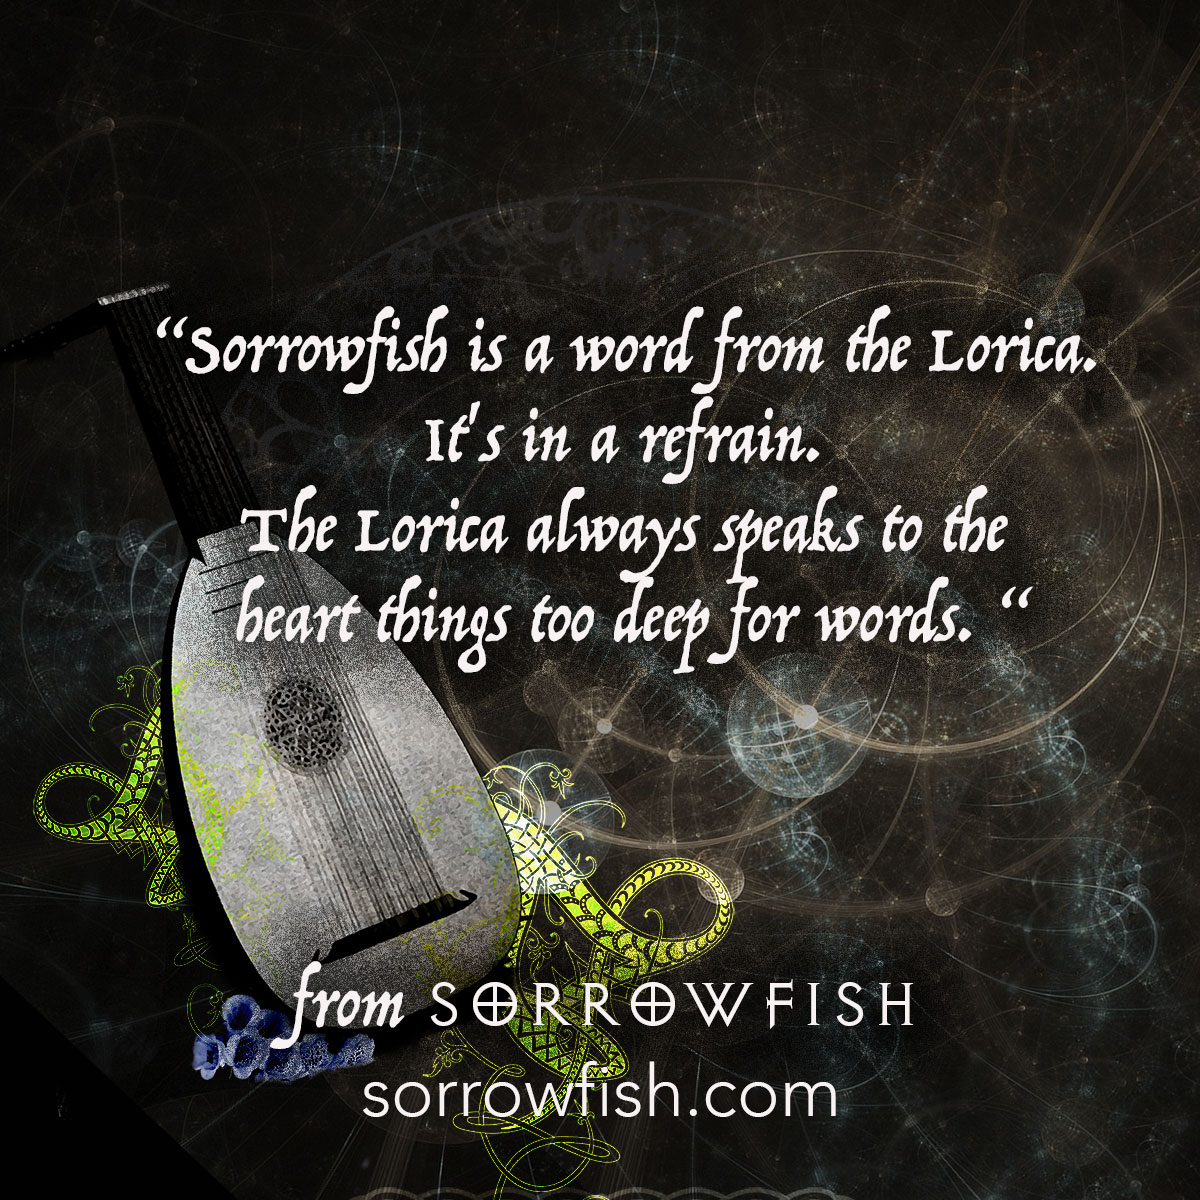 Sorrowfish is a word from the Lorica. It's in a refrain. The Lorica always speaks to the heart things too deep for words.